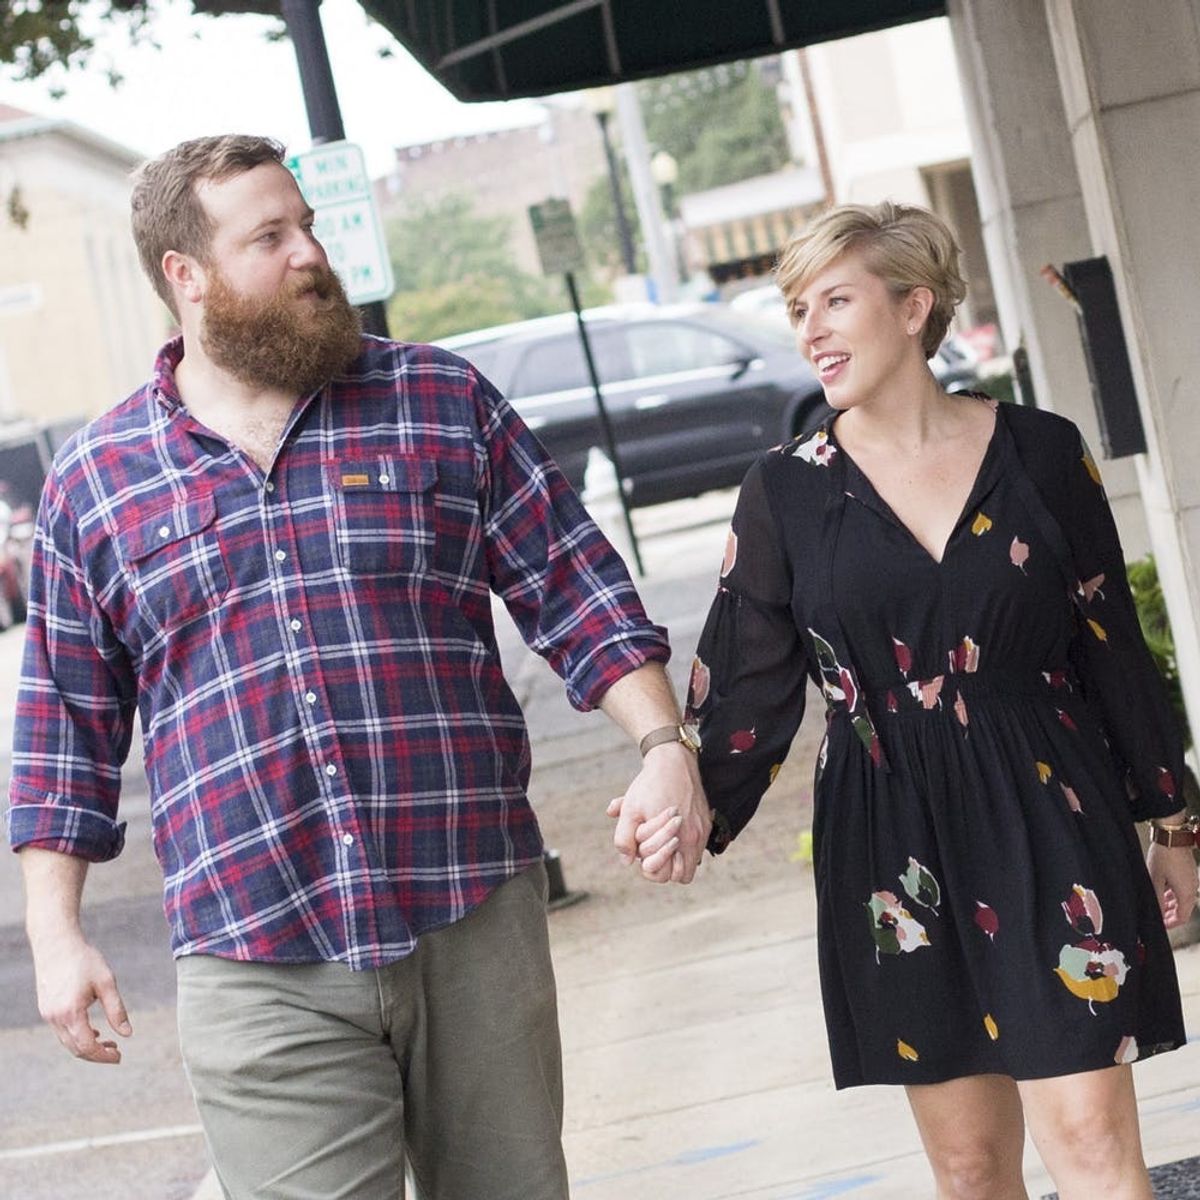 HGTV’s “Home Town” Stars Ben and Erin Napier Are Expecting a Baby Girl!